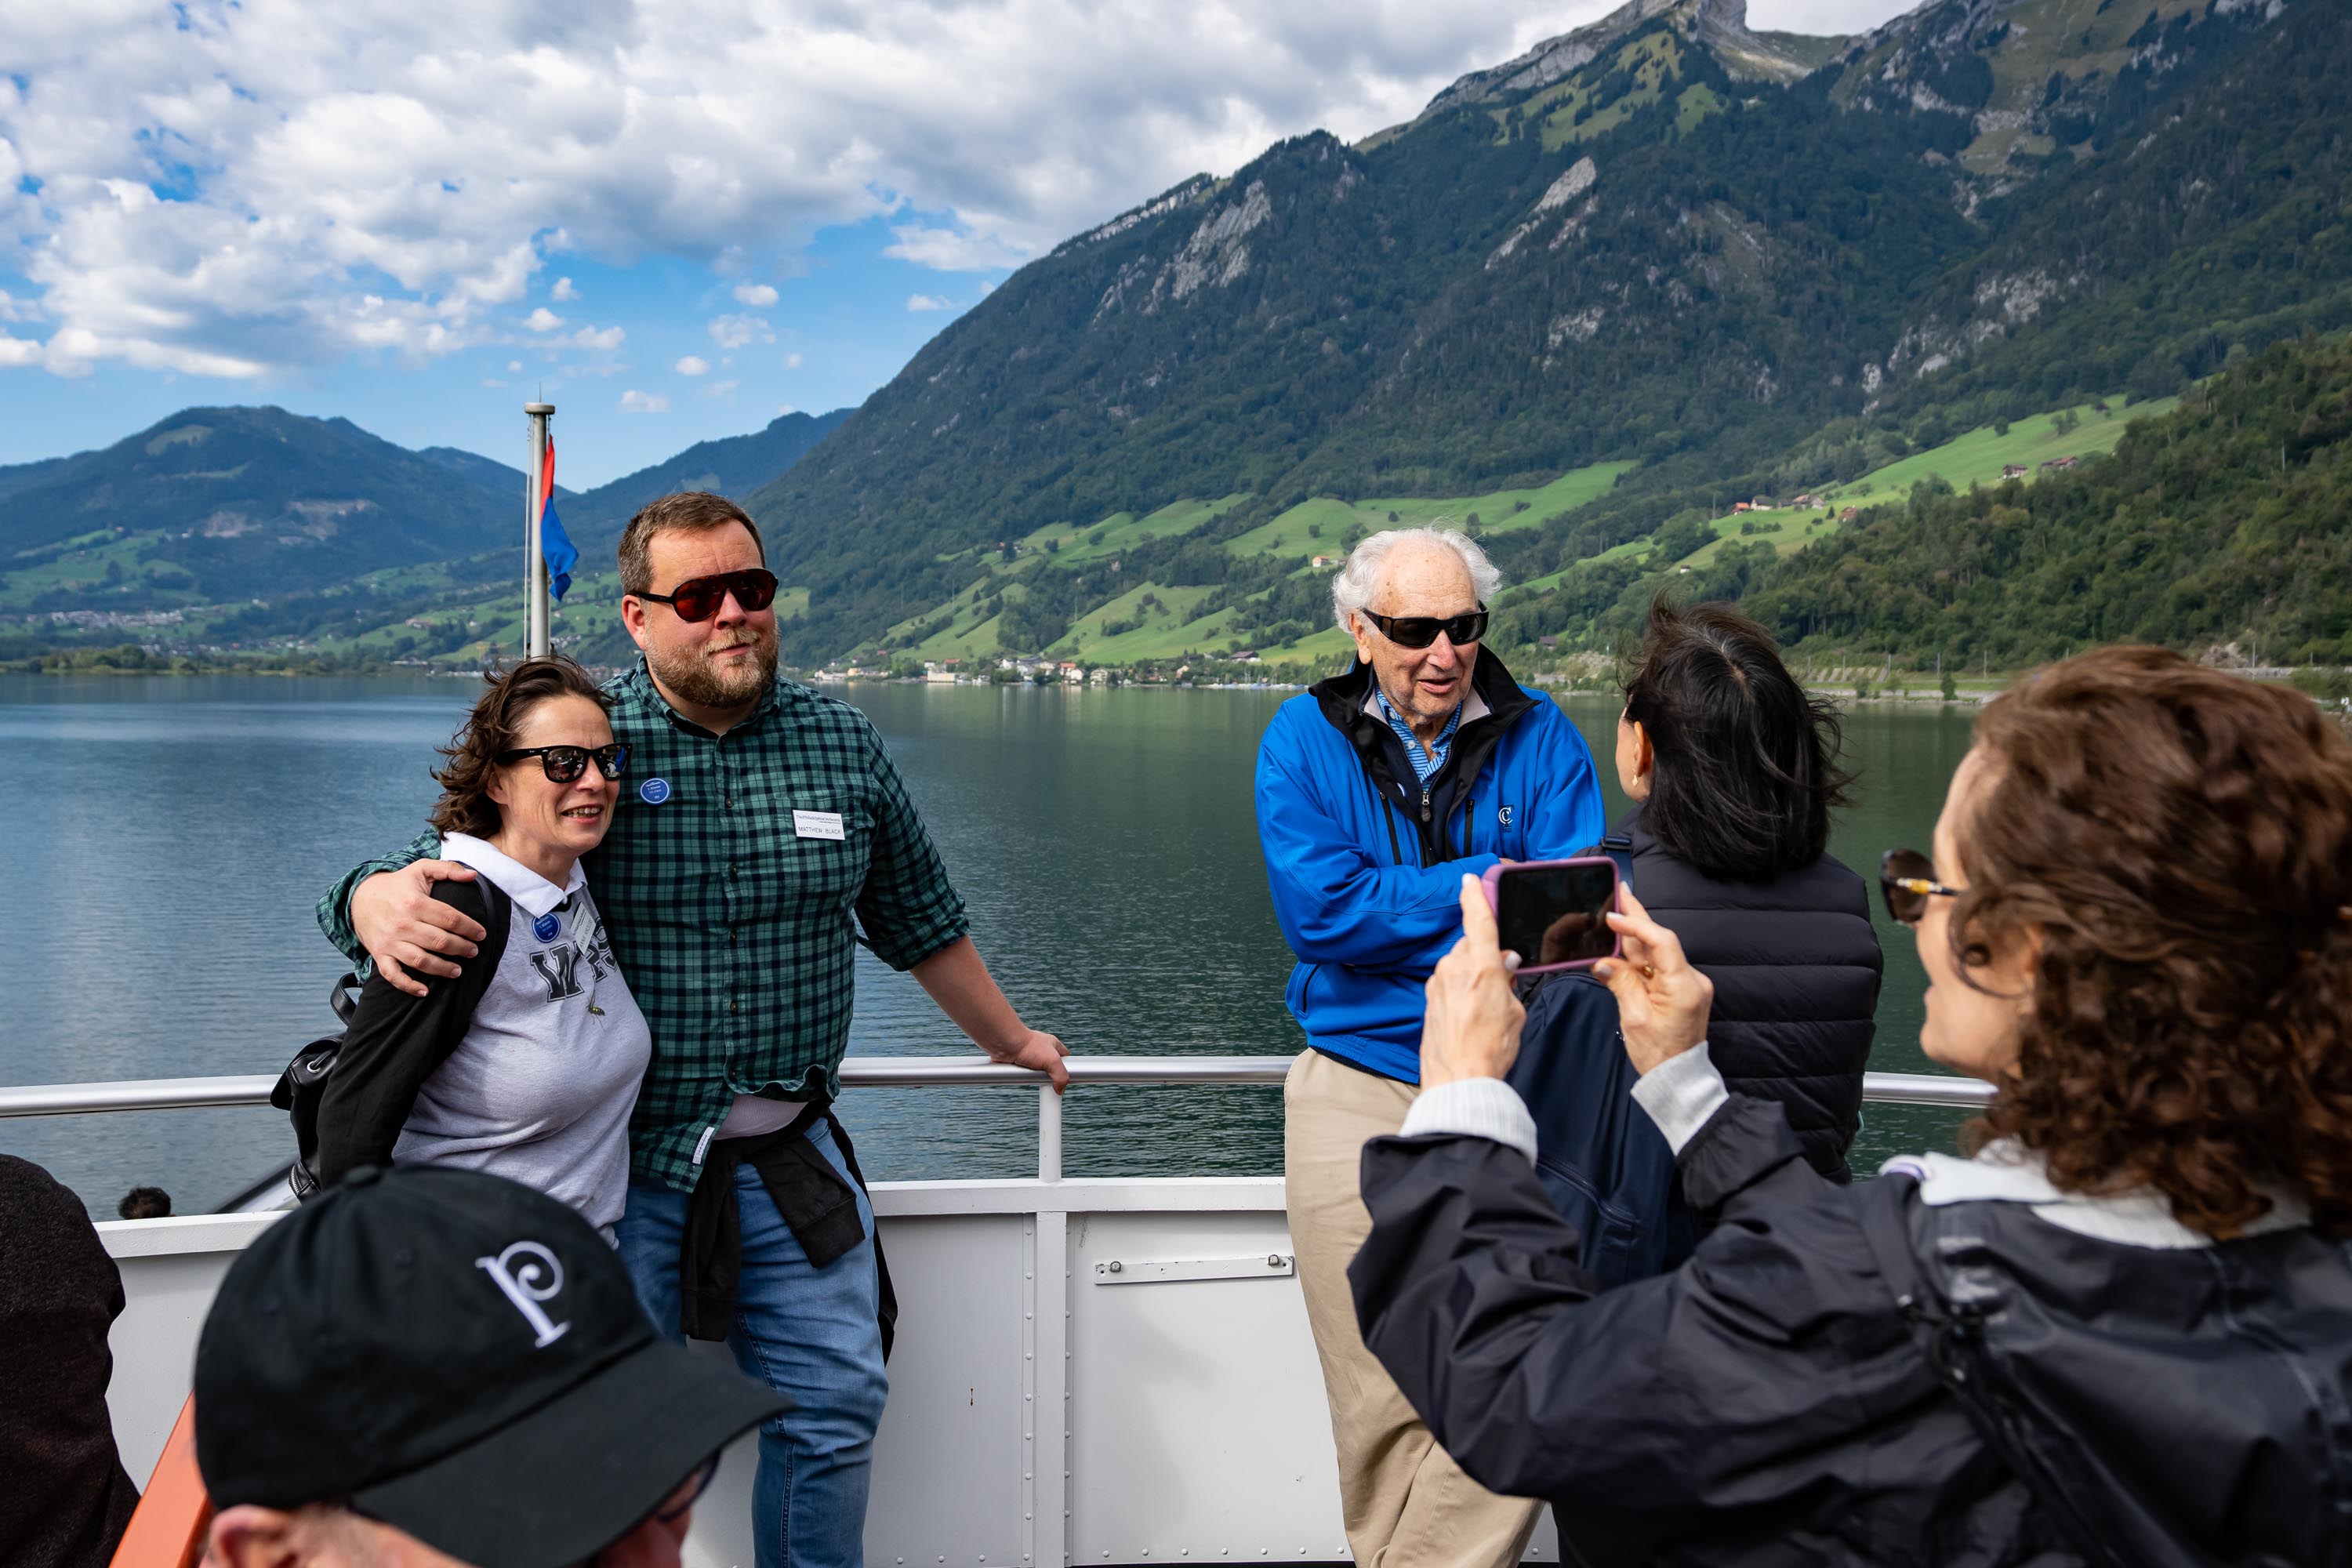 The Orchestra schedules Patron Tours for many of its oversees excursions. Here members take a leisurely cruise on Lake Lucerne